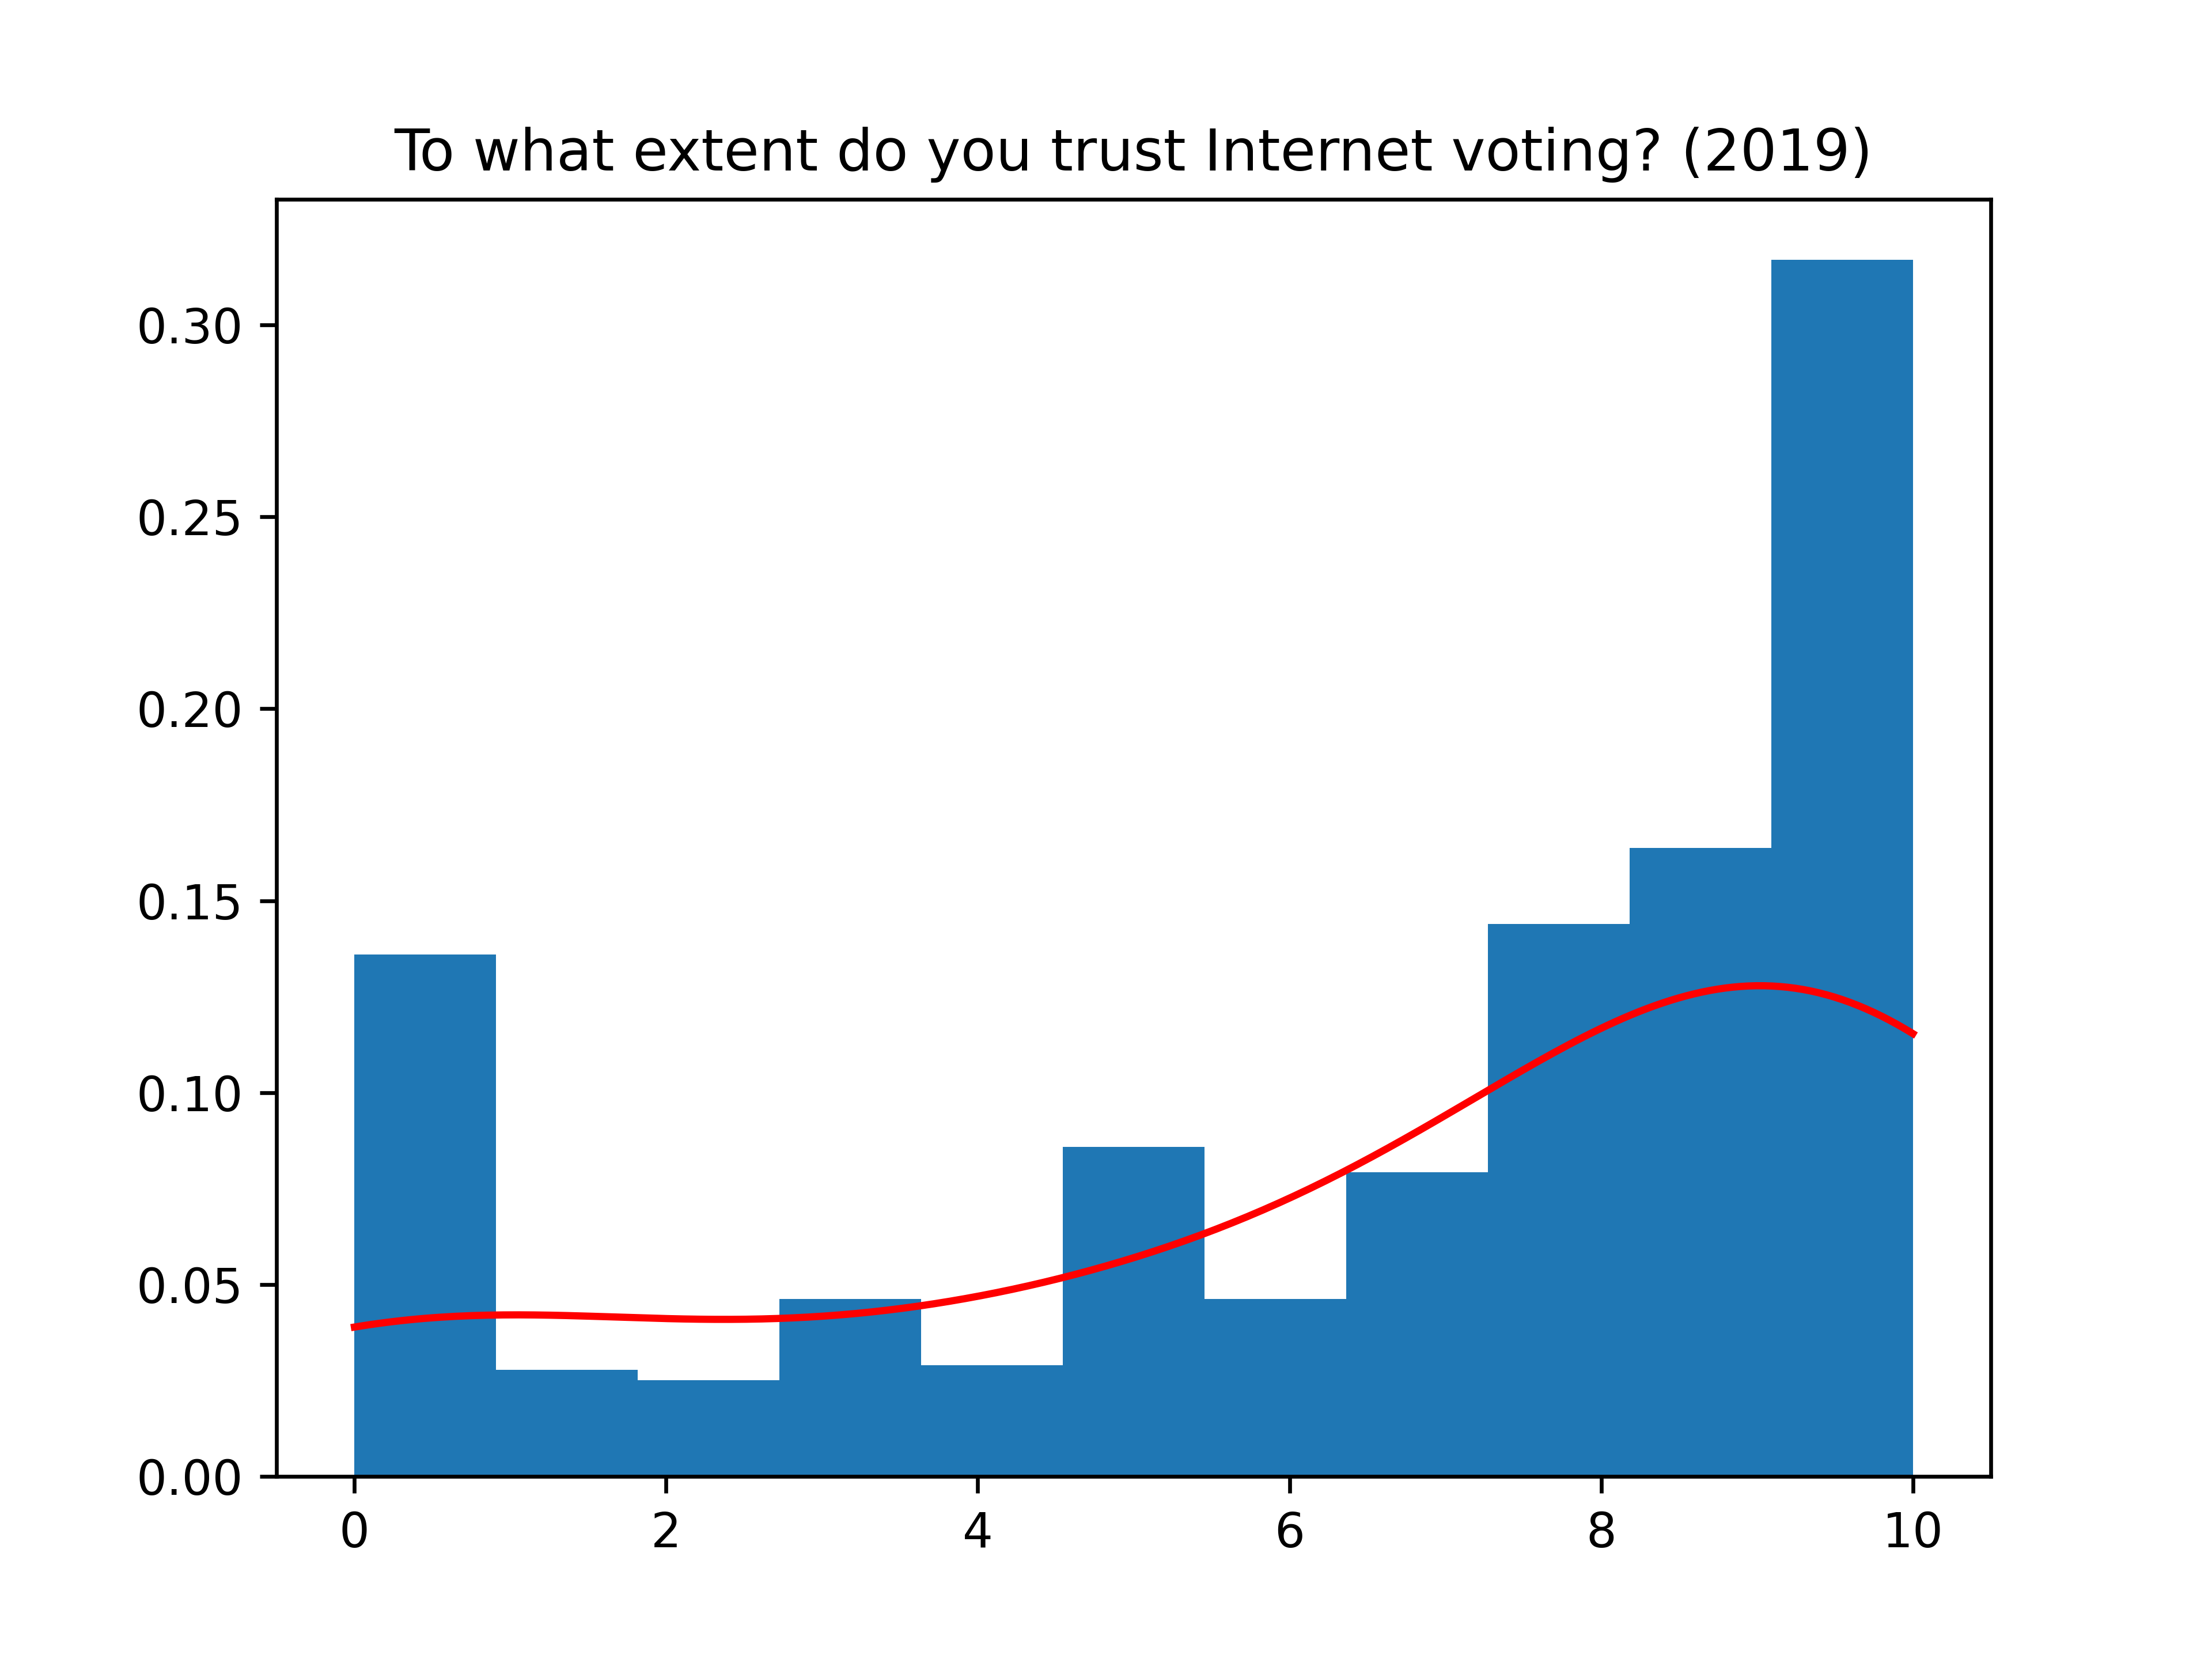 Polarisation in trust curves of Internet voting on 2013 and 2019